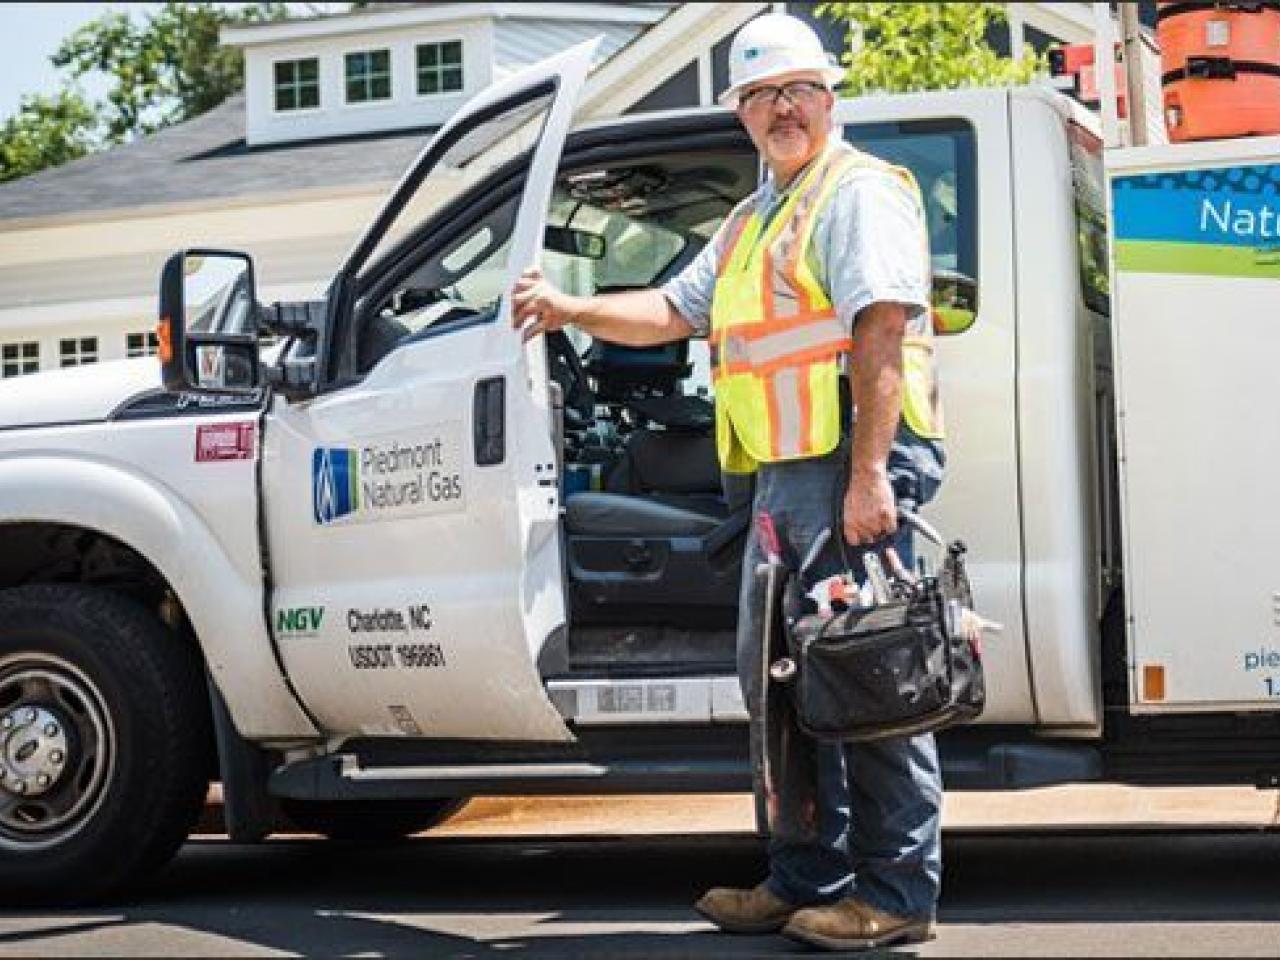 A utility worker standing with a hand on an open door to a utility truck in a residential area.